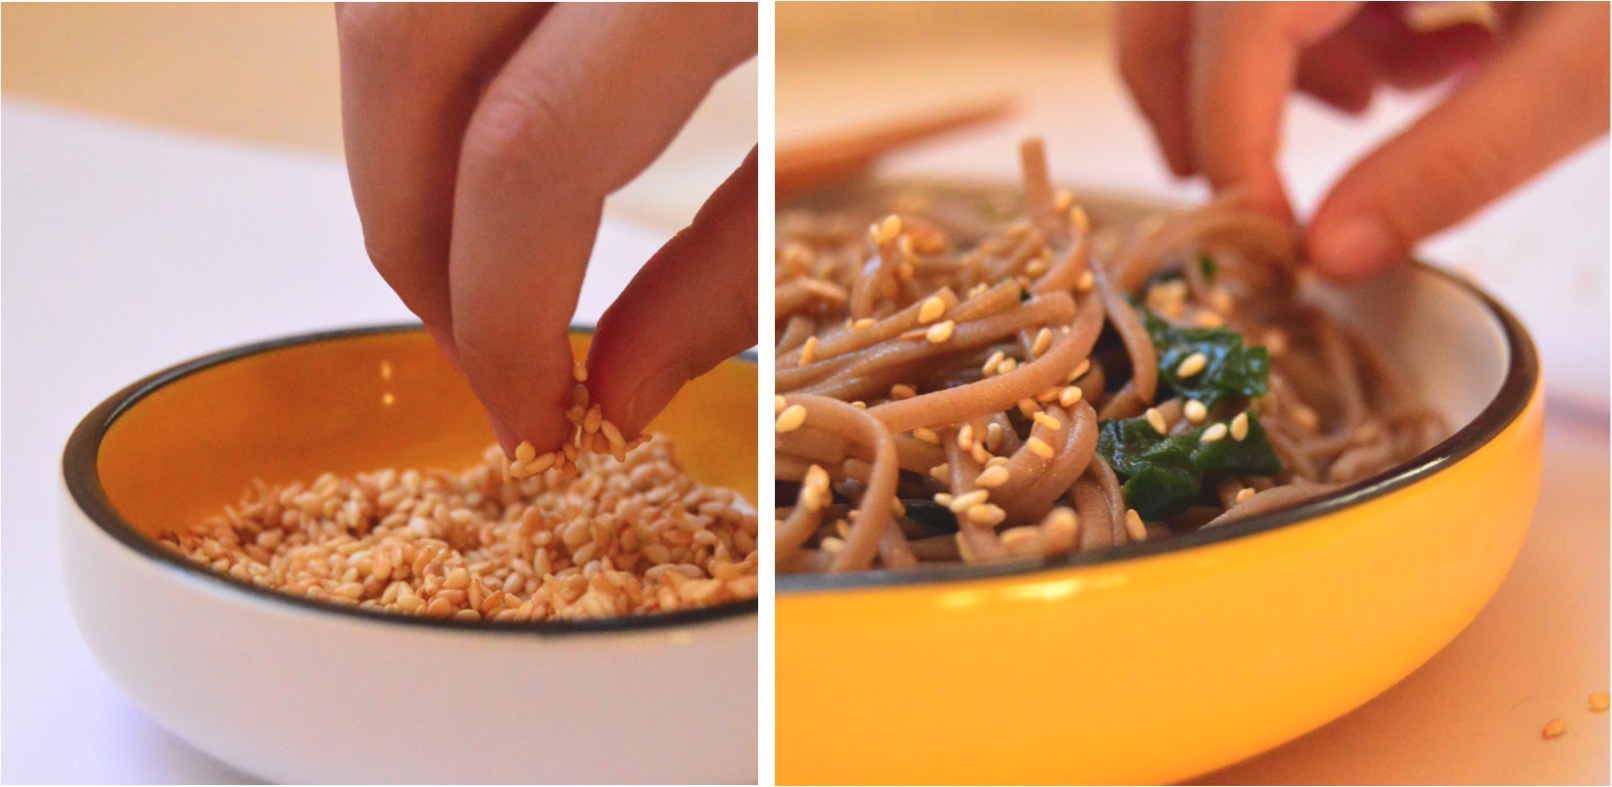 "soba noodles with spinach recipe"